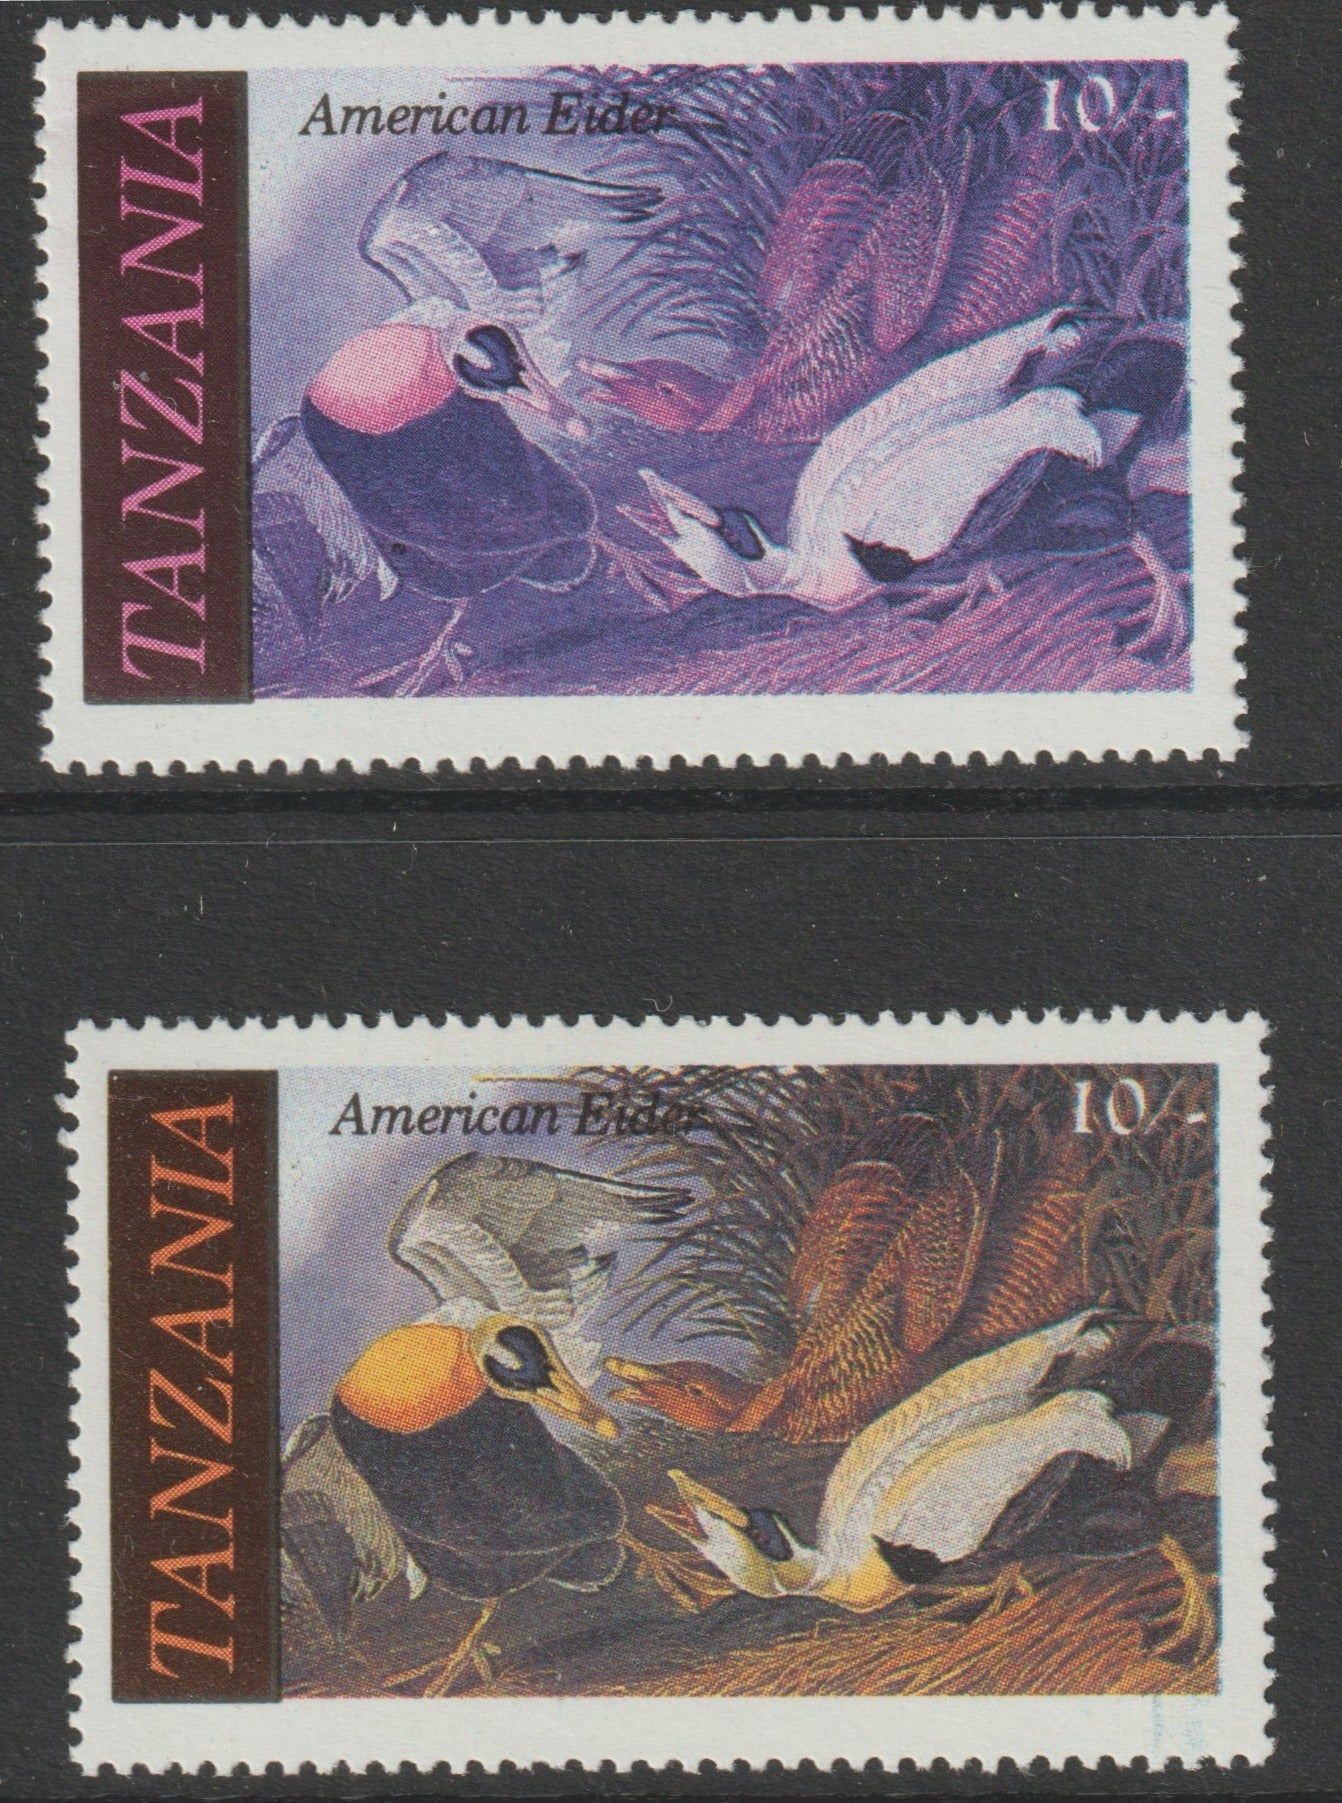 Tanzania 1986 John Audubon Birds 10s (American Eider) with yellow omitted, complete sheetlet of 8 plus normal sheet, both unmounted mint (as SG 465)